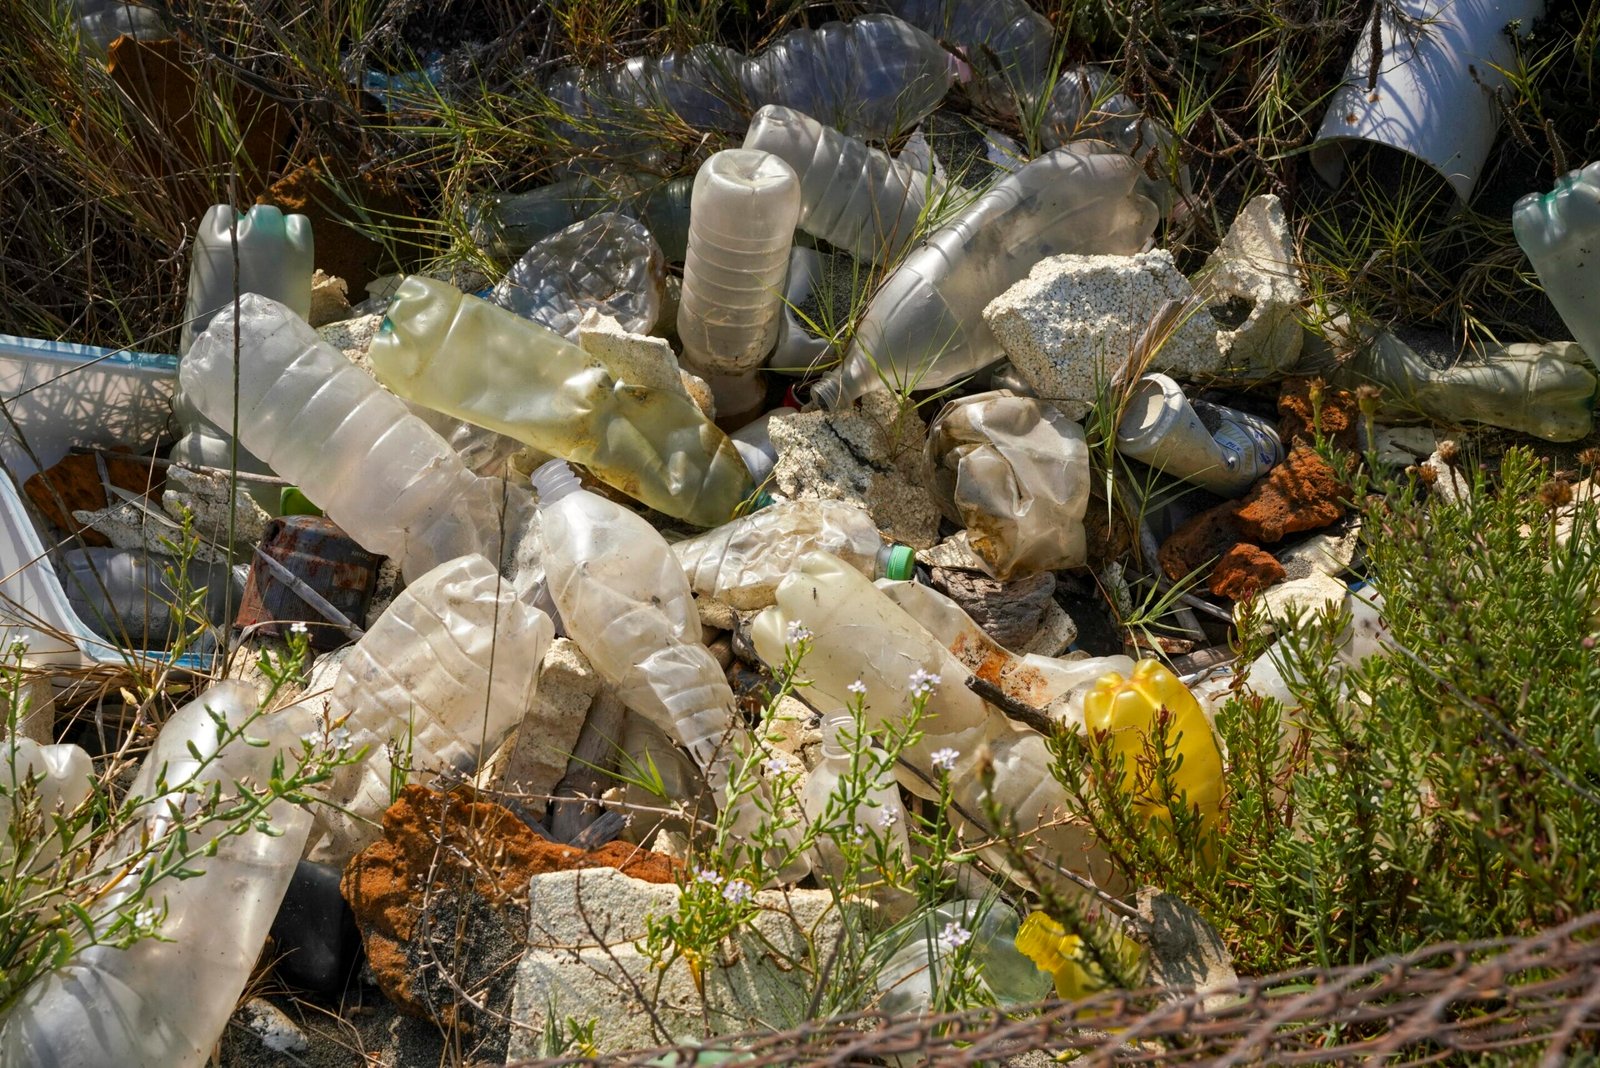 Study raises questions about plastic pollution’s effect on heart health